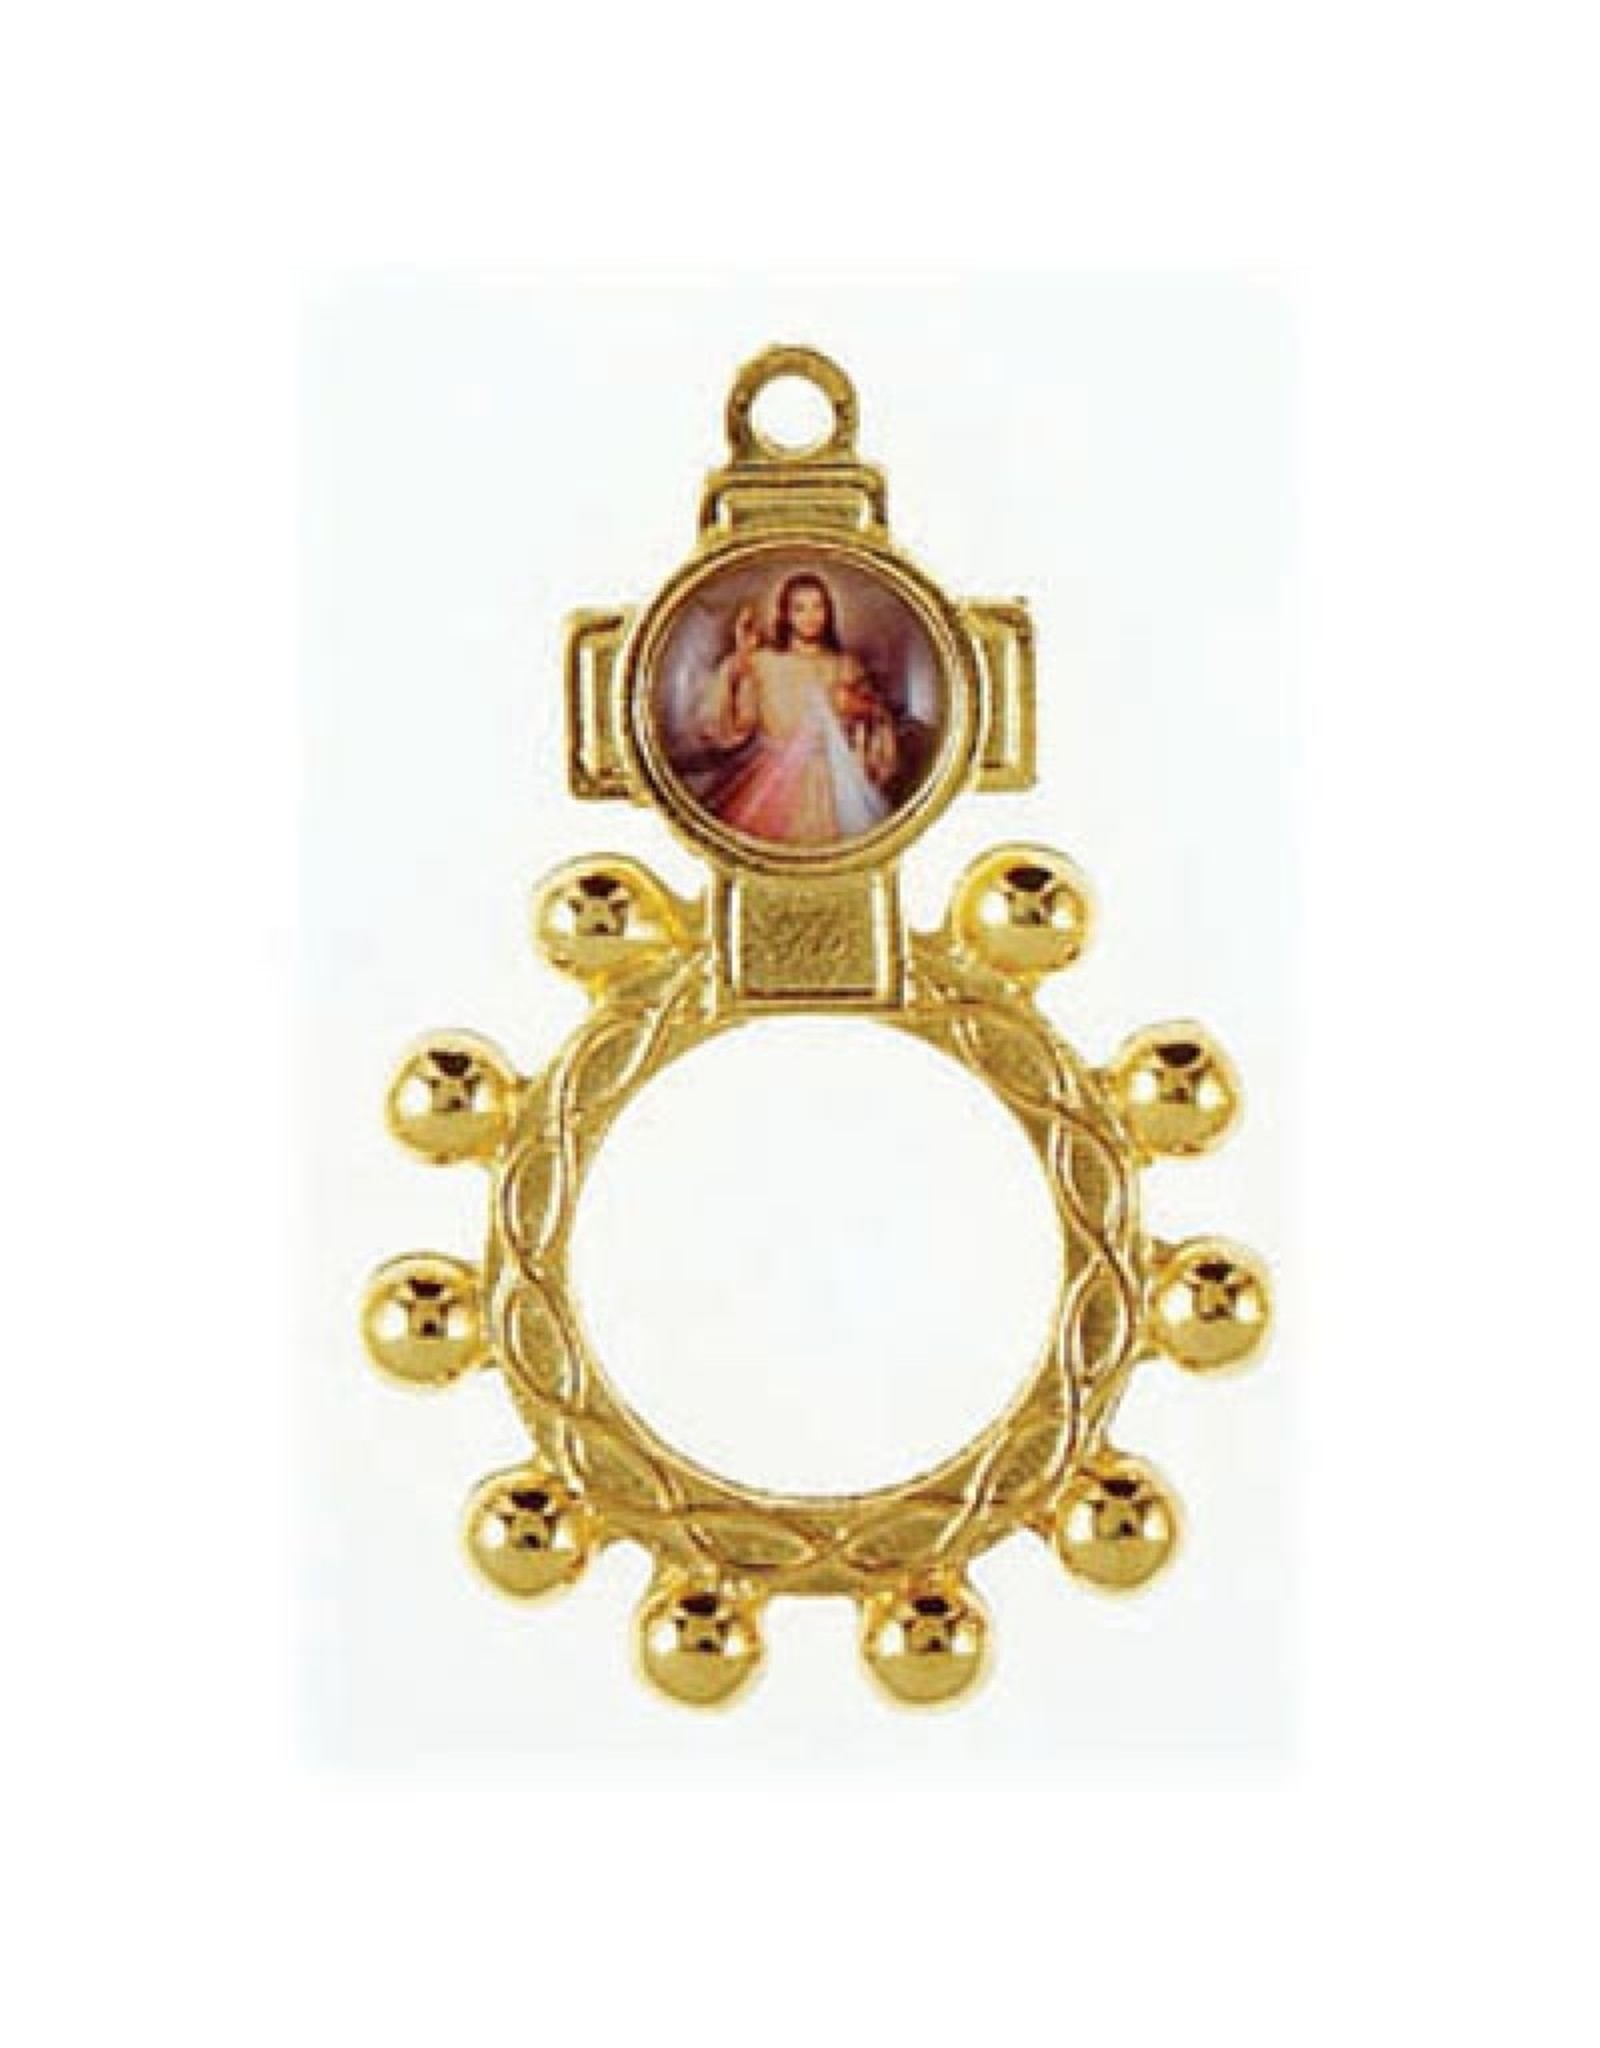 San Francis Finger Rosary - Divine Mercy, Gold